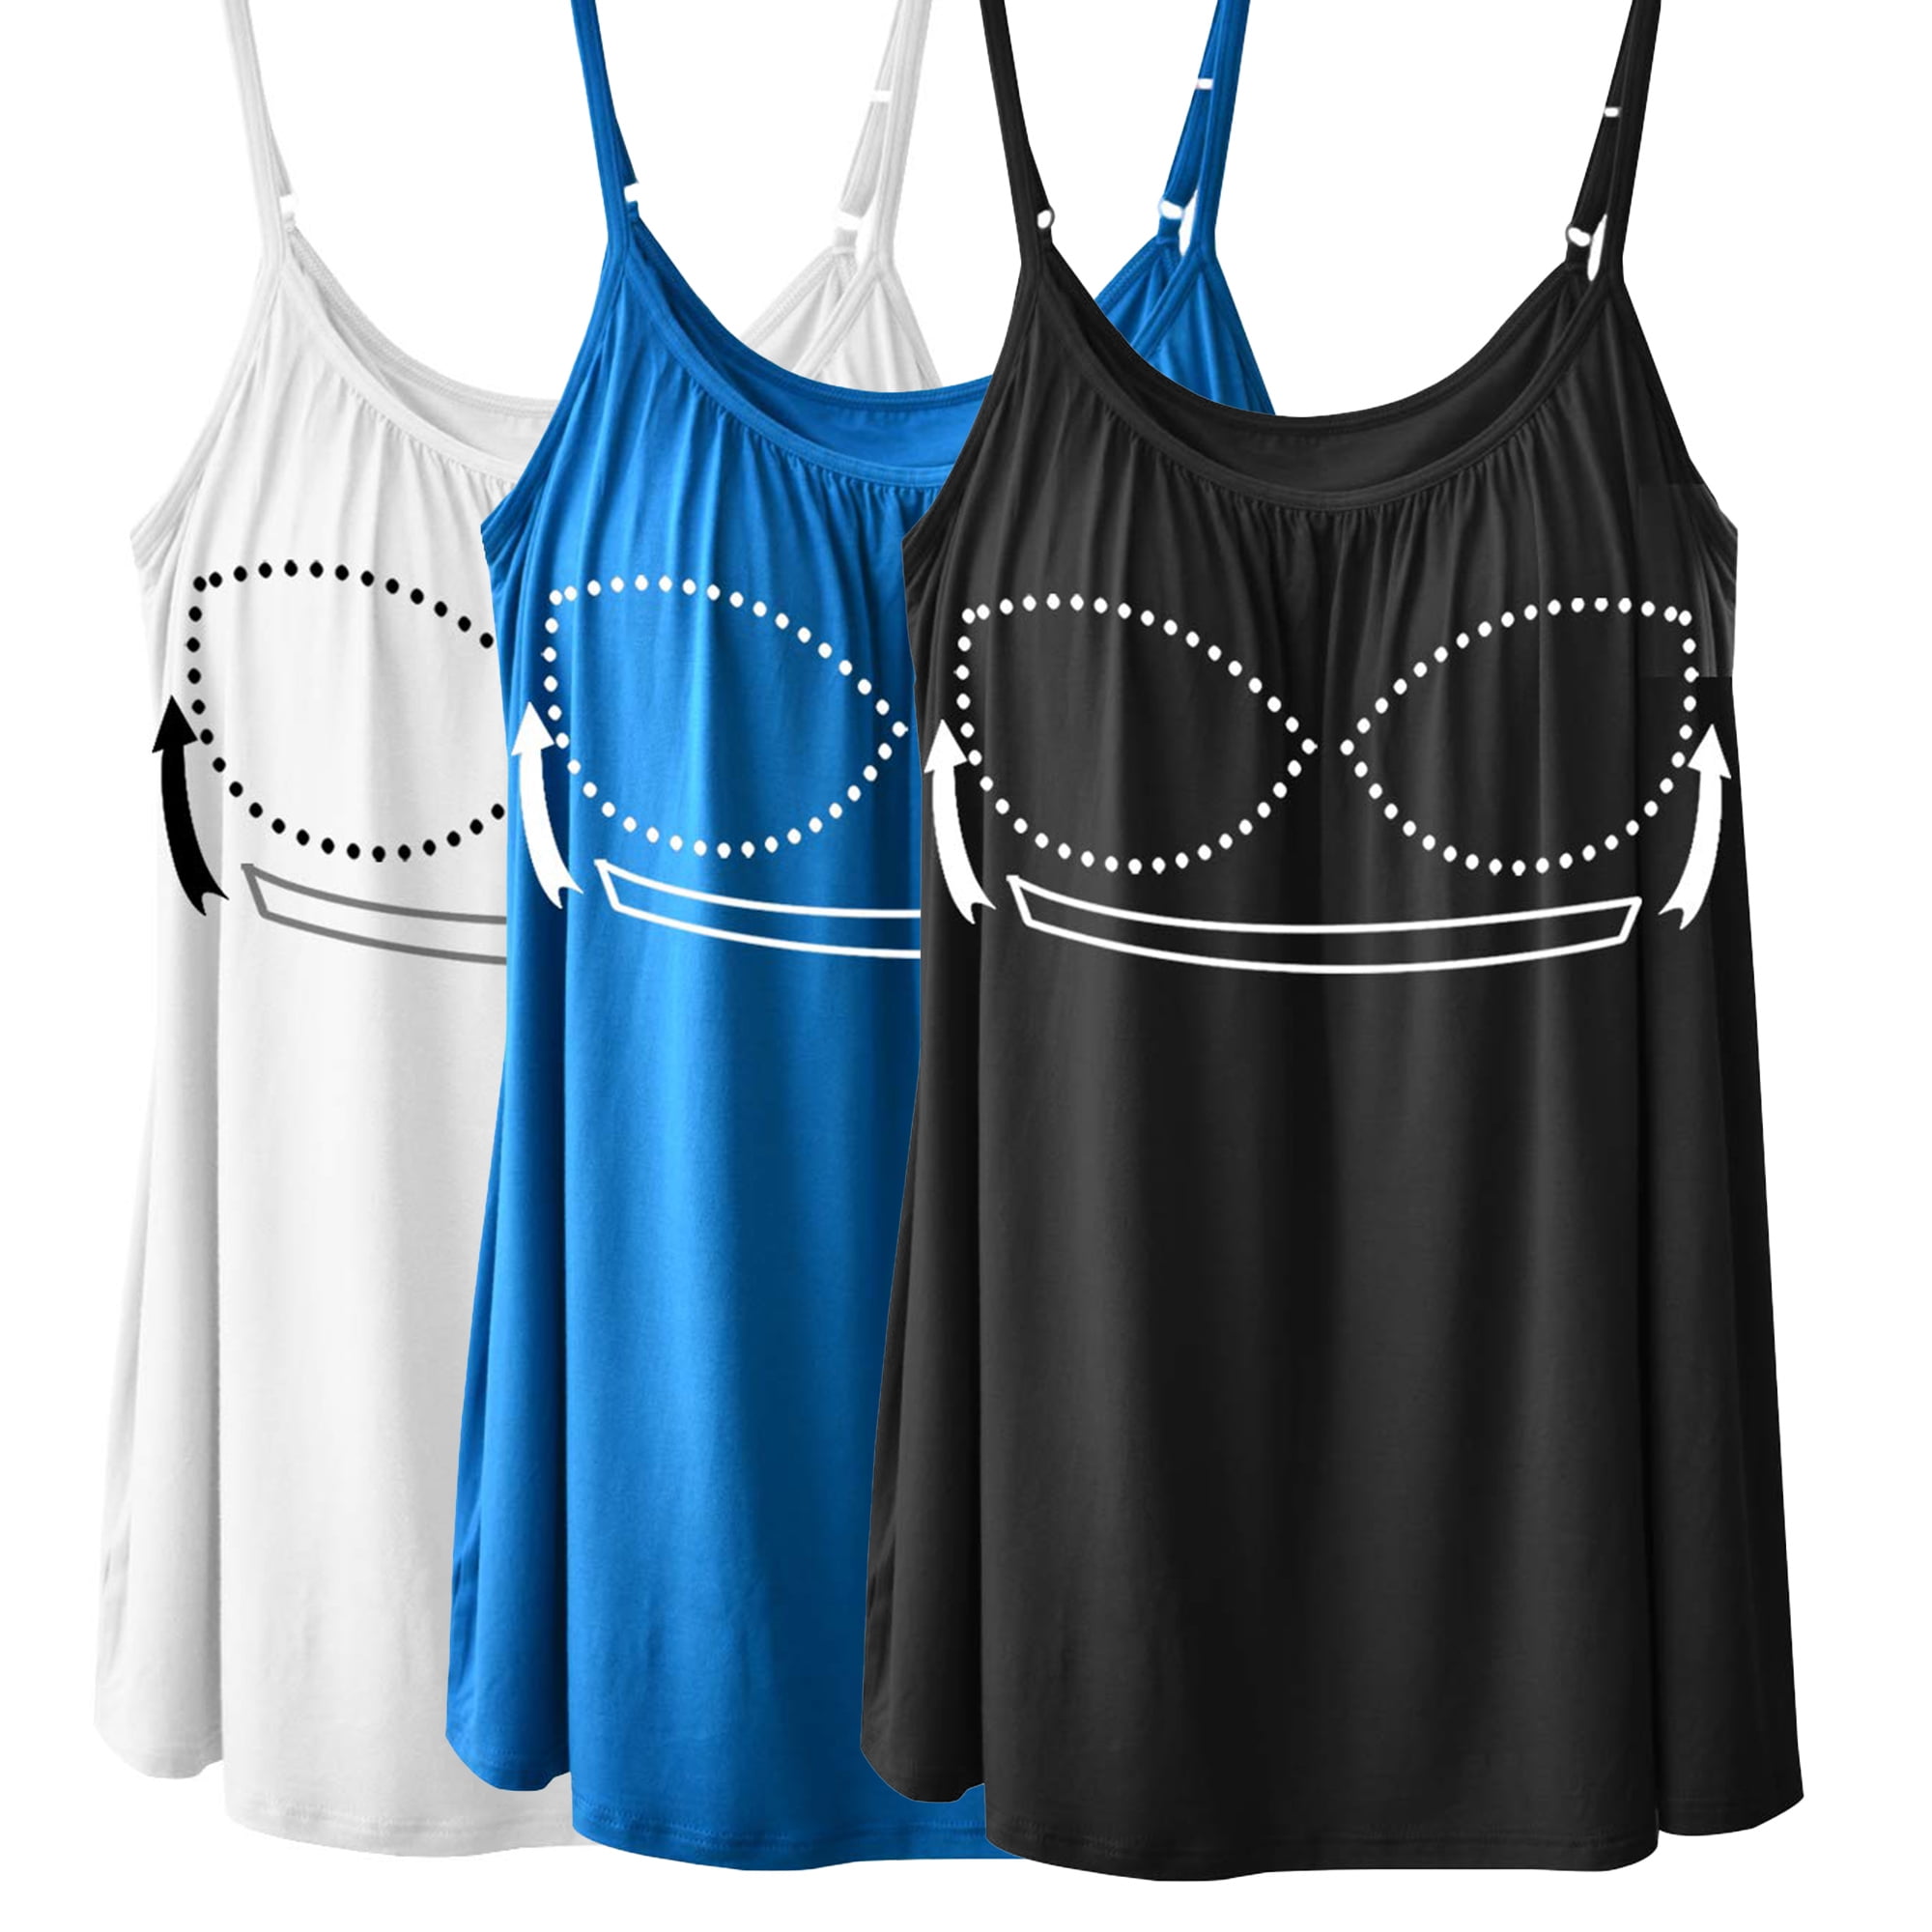 CARCOS Womens Camisoles with Built in Bras Plus Size Summer Tank Top  Adjustable Spaghetti Strap Flowy Sleeveless Camis Black-White,Medium 